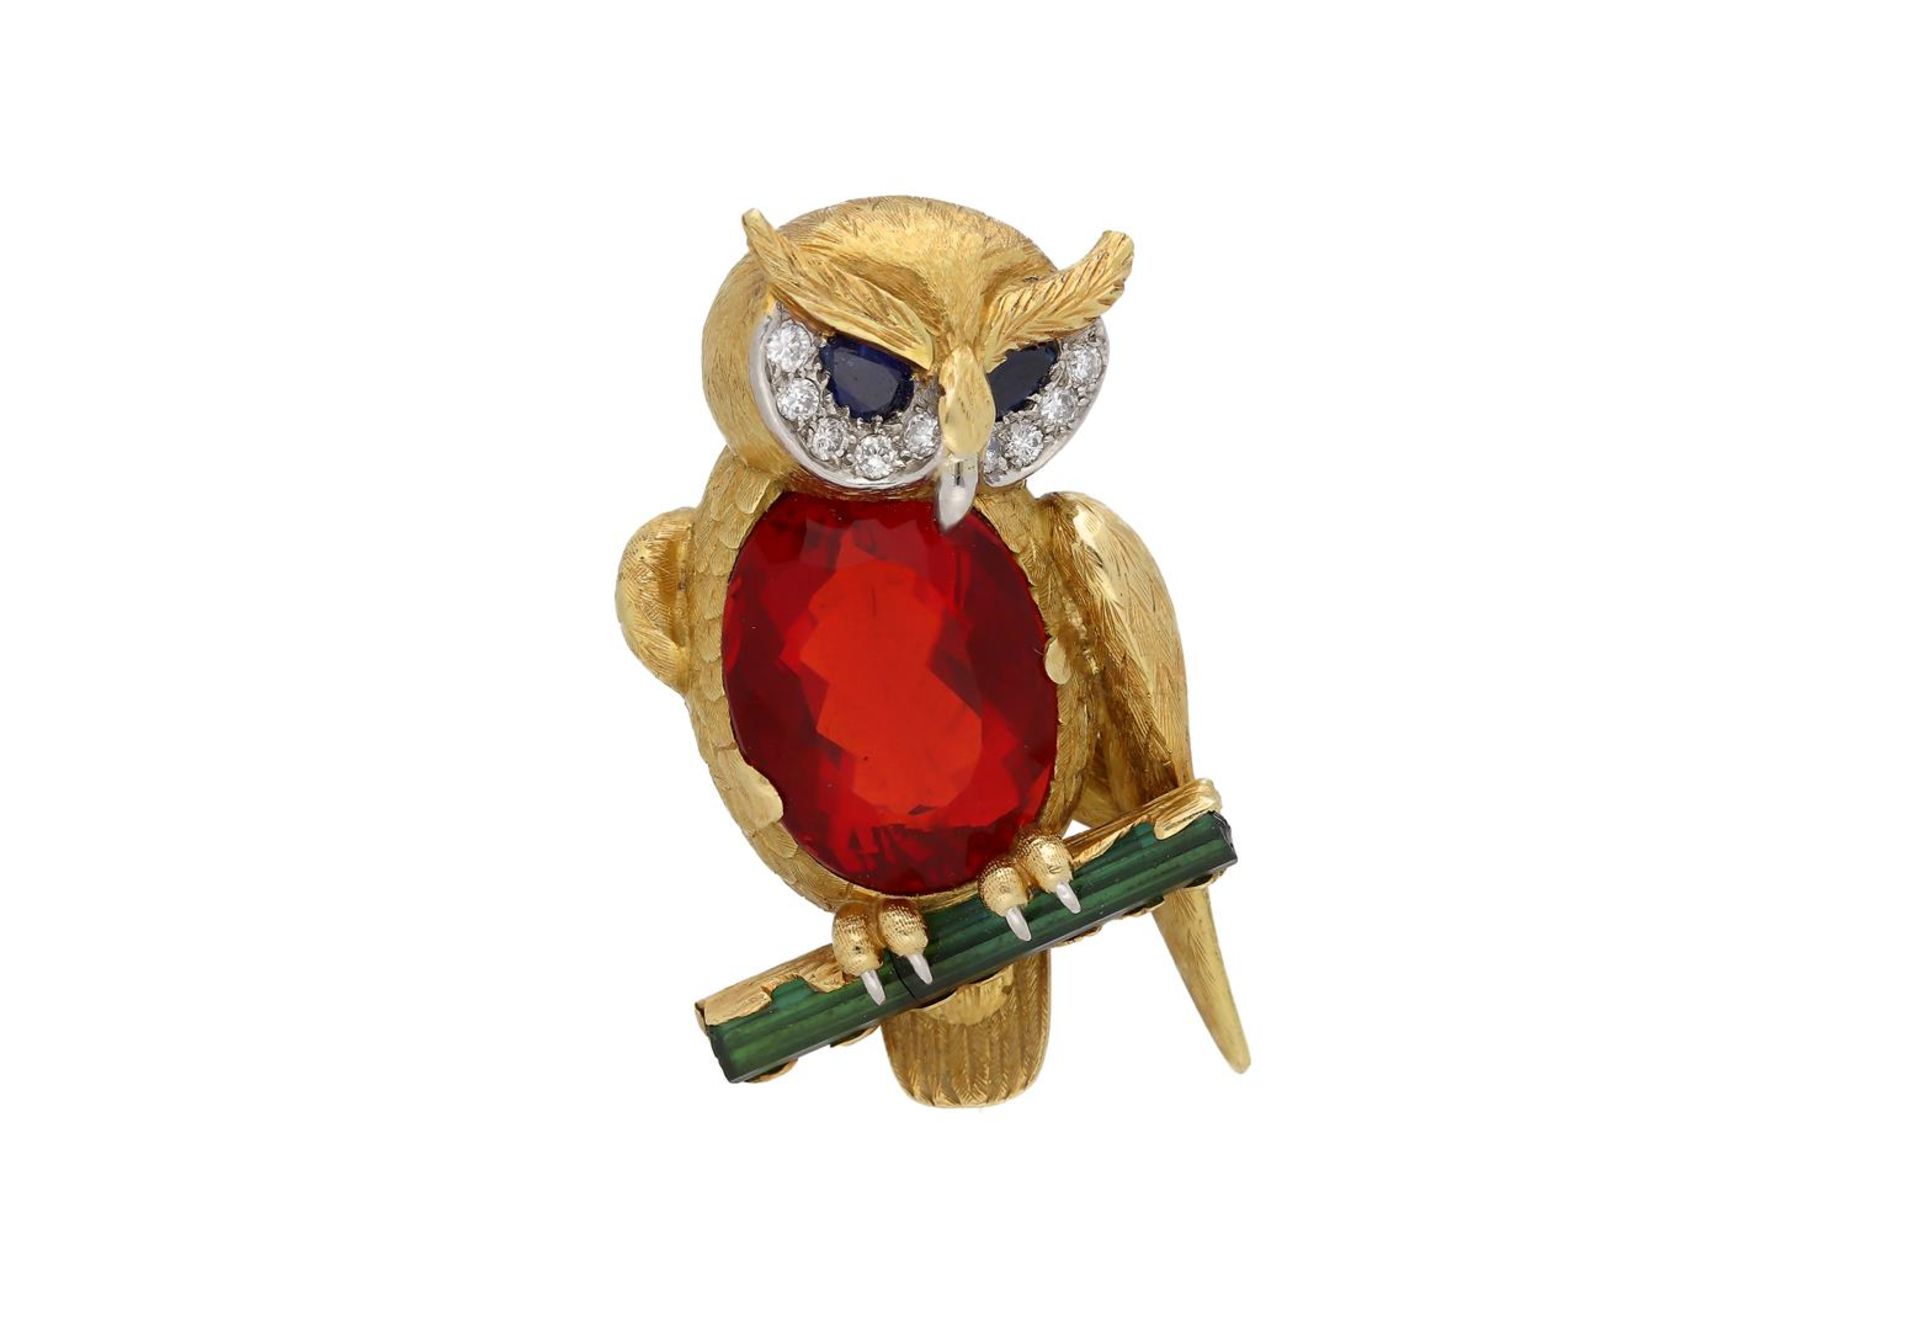 E. Wolfe & co., 18-kt gold novelty gemset brooch in the shape of an owl, the sapphire eyes surrounde